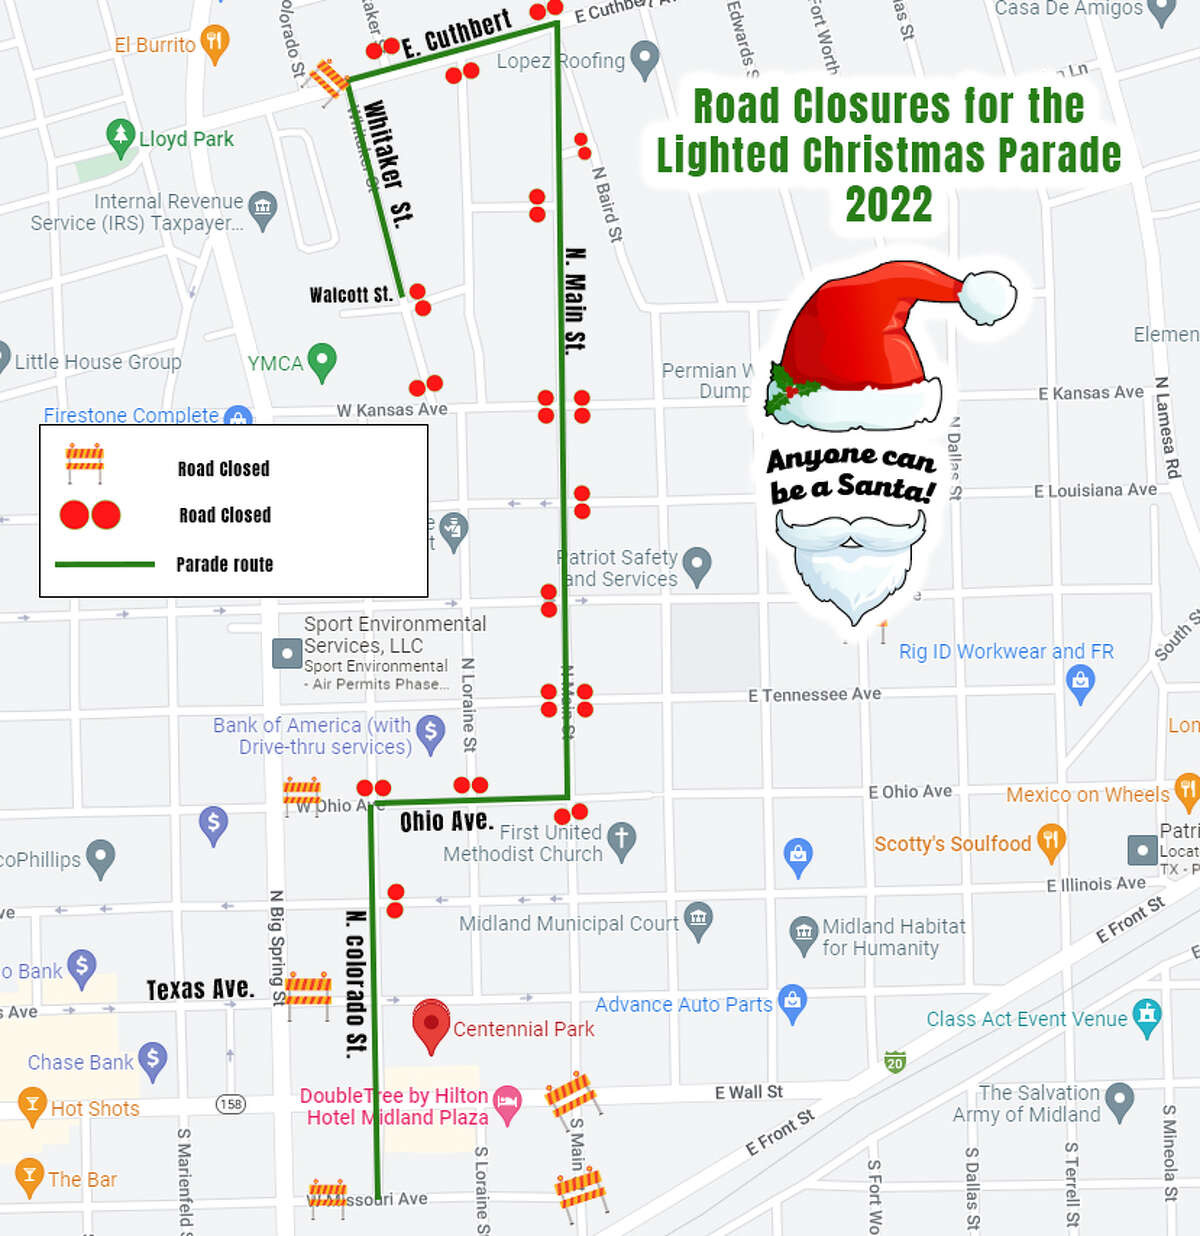 City of Midland posts Lighted Christmas Parade road closures